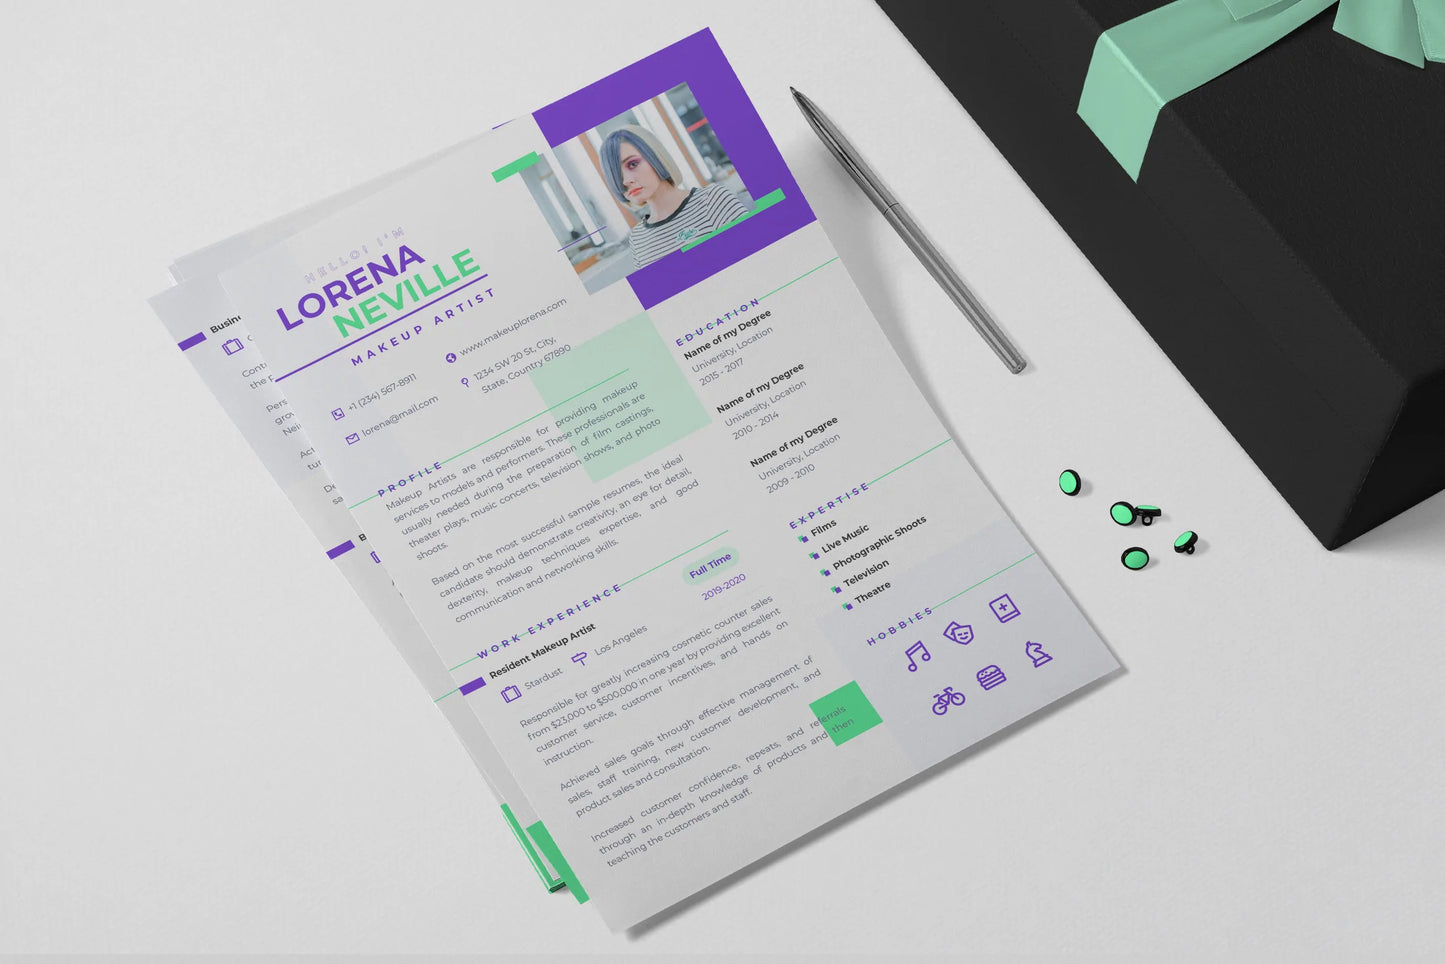 Eva Resume + Cover Letter Template Infographic Templates PowerPoint slides